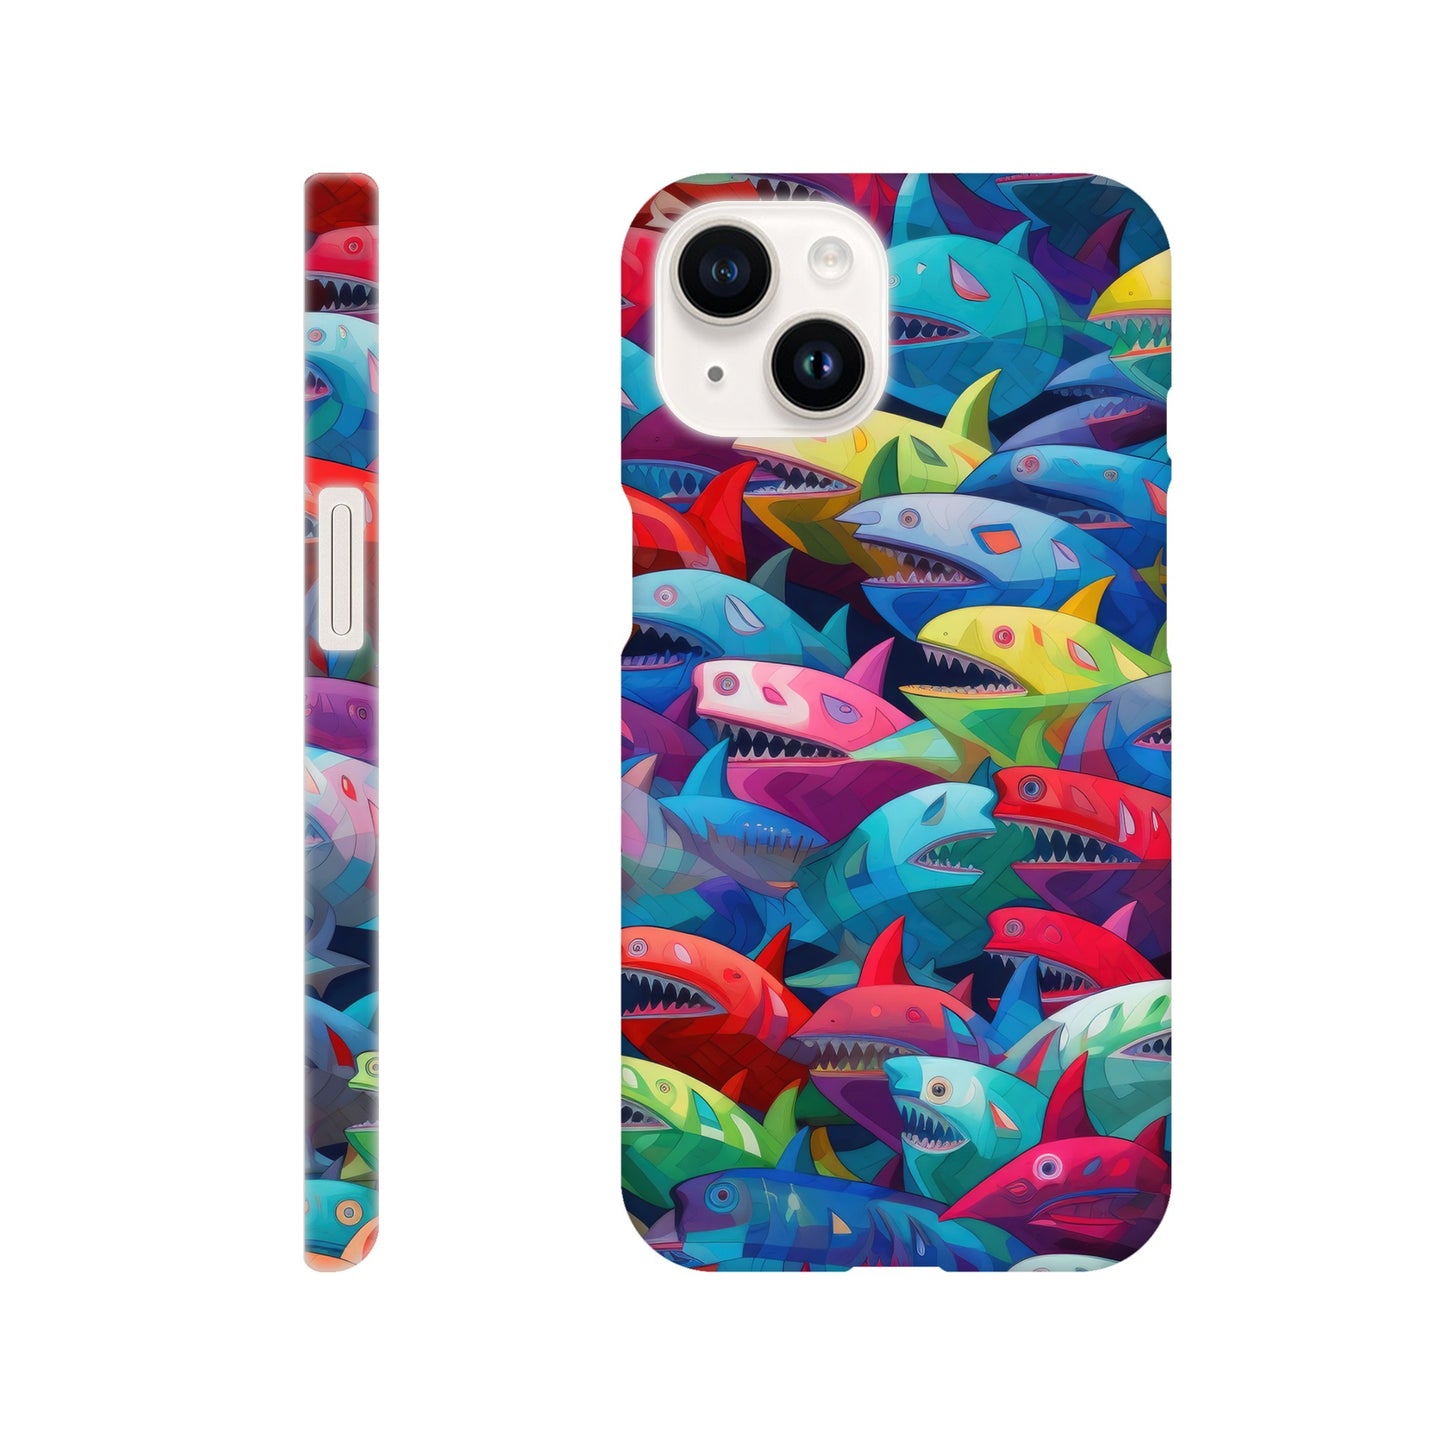 Vibrant Sharks: Slim Multicolored Phone Case - Protect and Flaunt in Style!